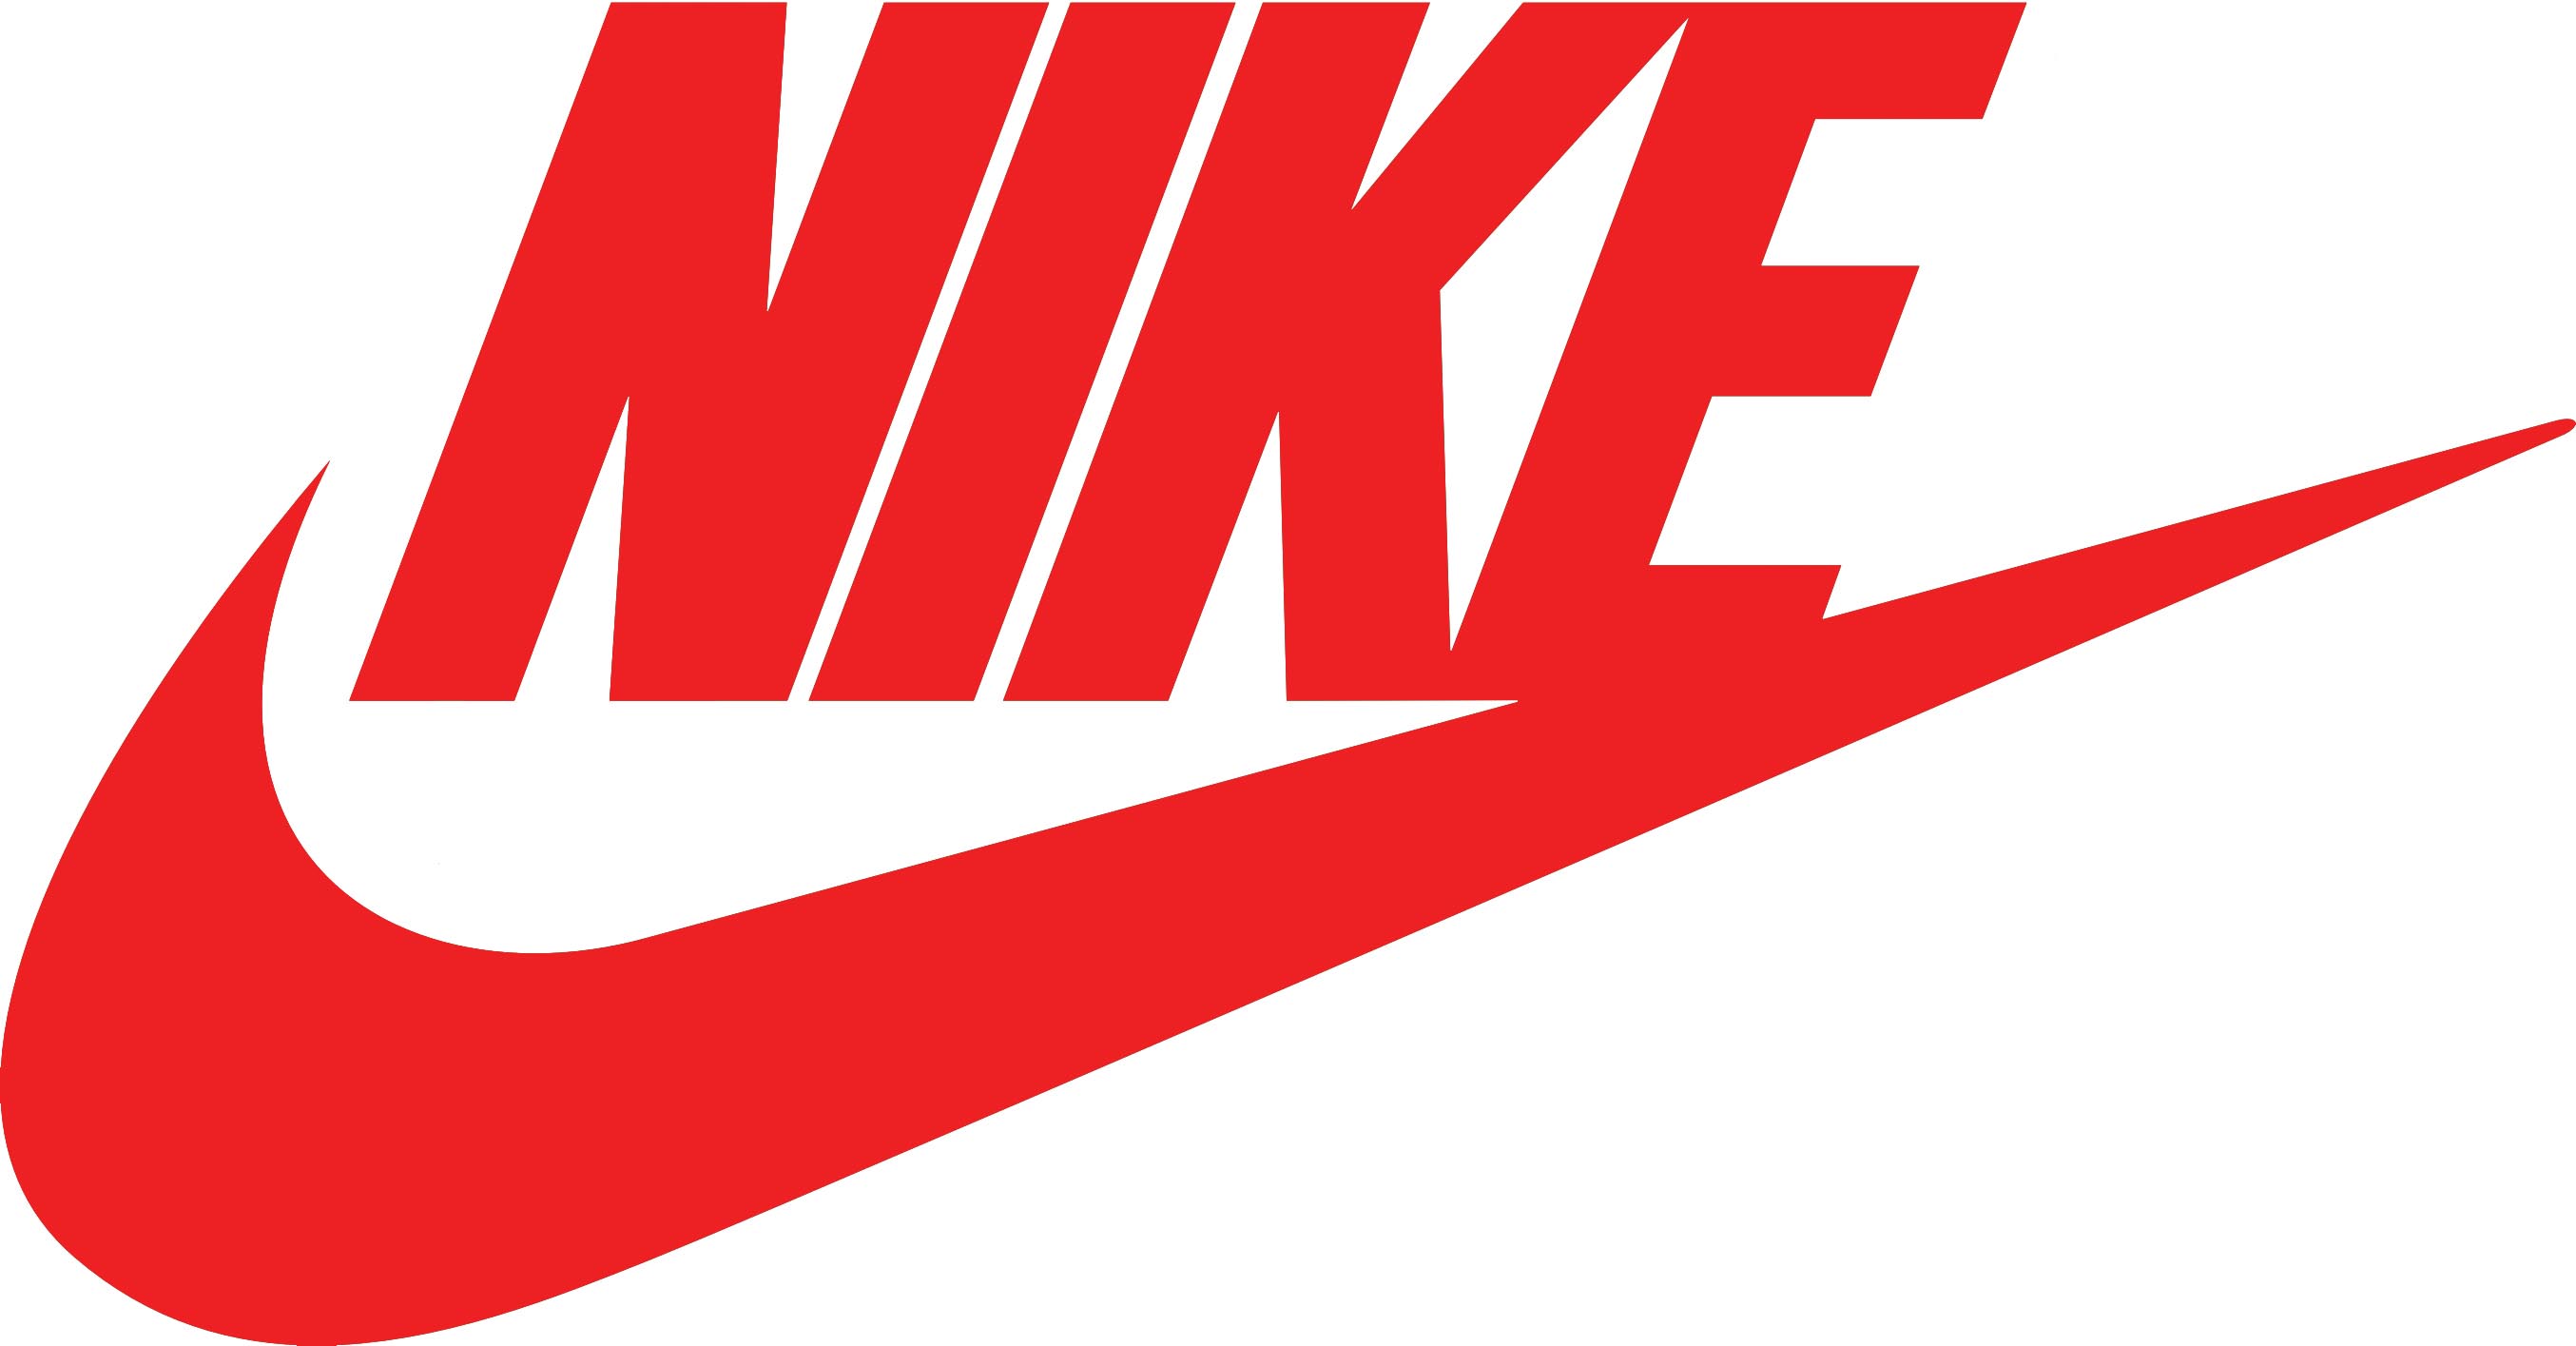 Nike Logo Clipart And Look At Clip Art Images Clipartlook | Images and ...